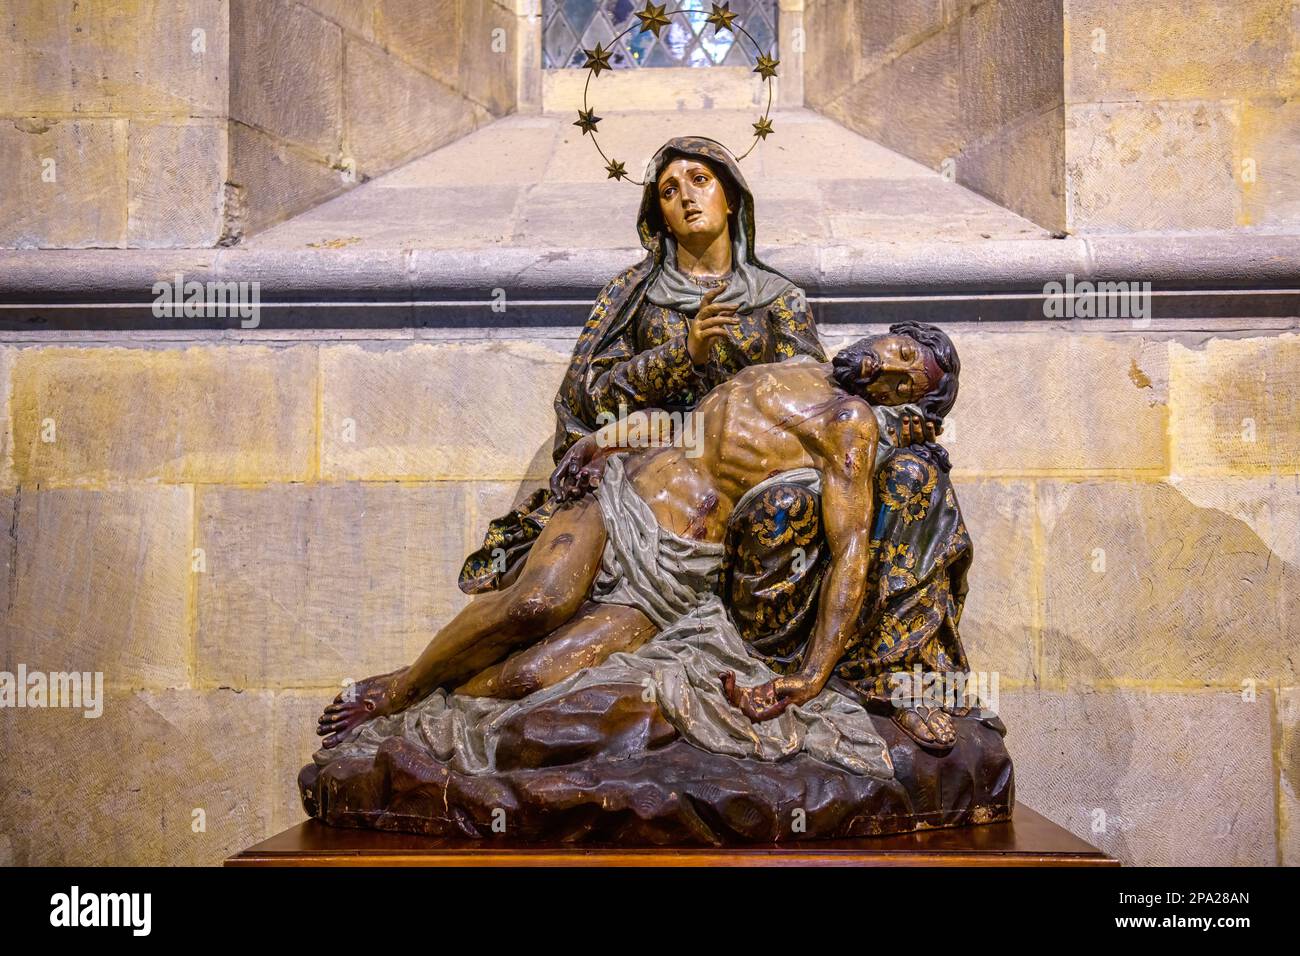 An ancient sculpture or art of Virgin Mary with the body of dead Jesus Christ in her hands. Stock Photo